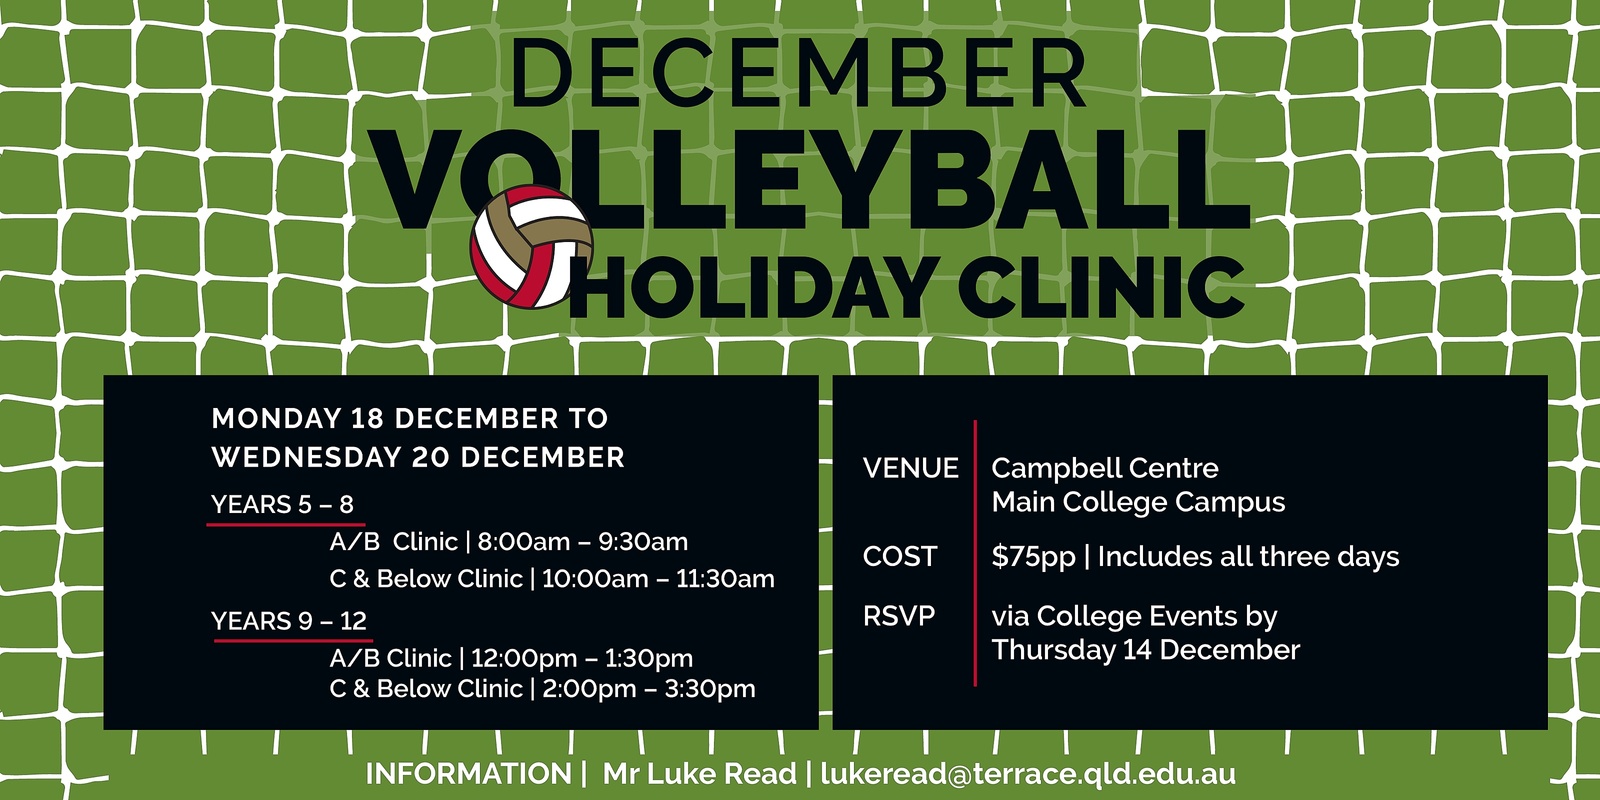 Banner image for Volleyball December Holiday Clinics